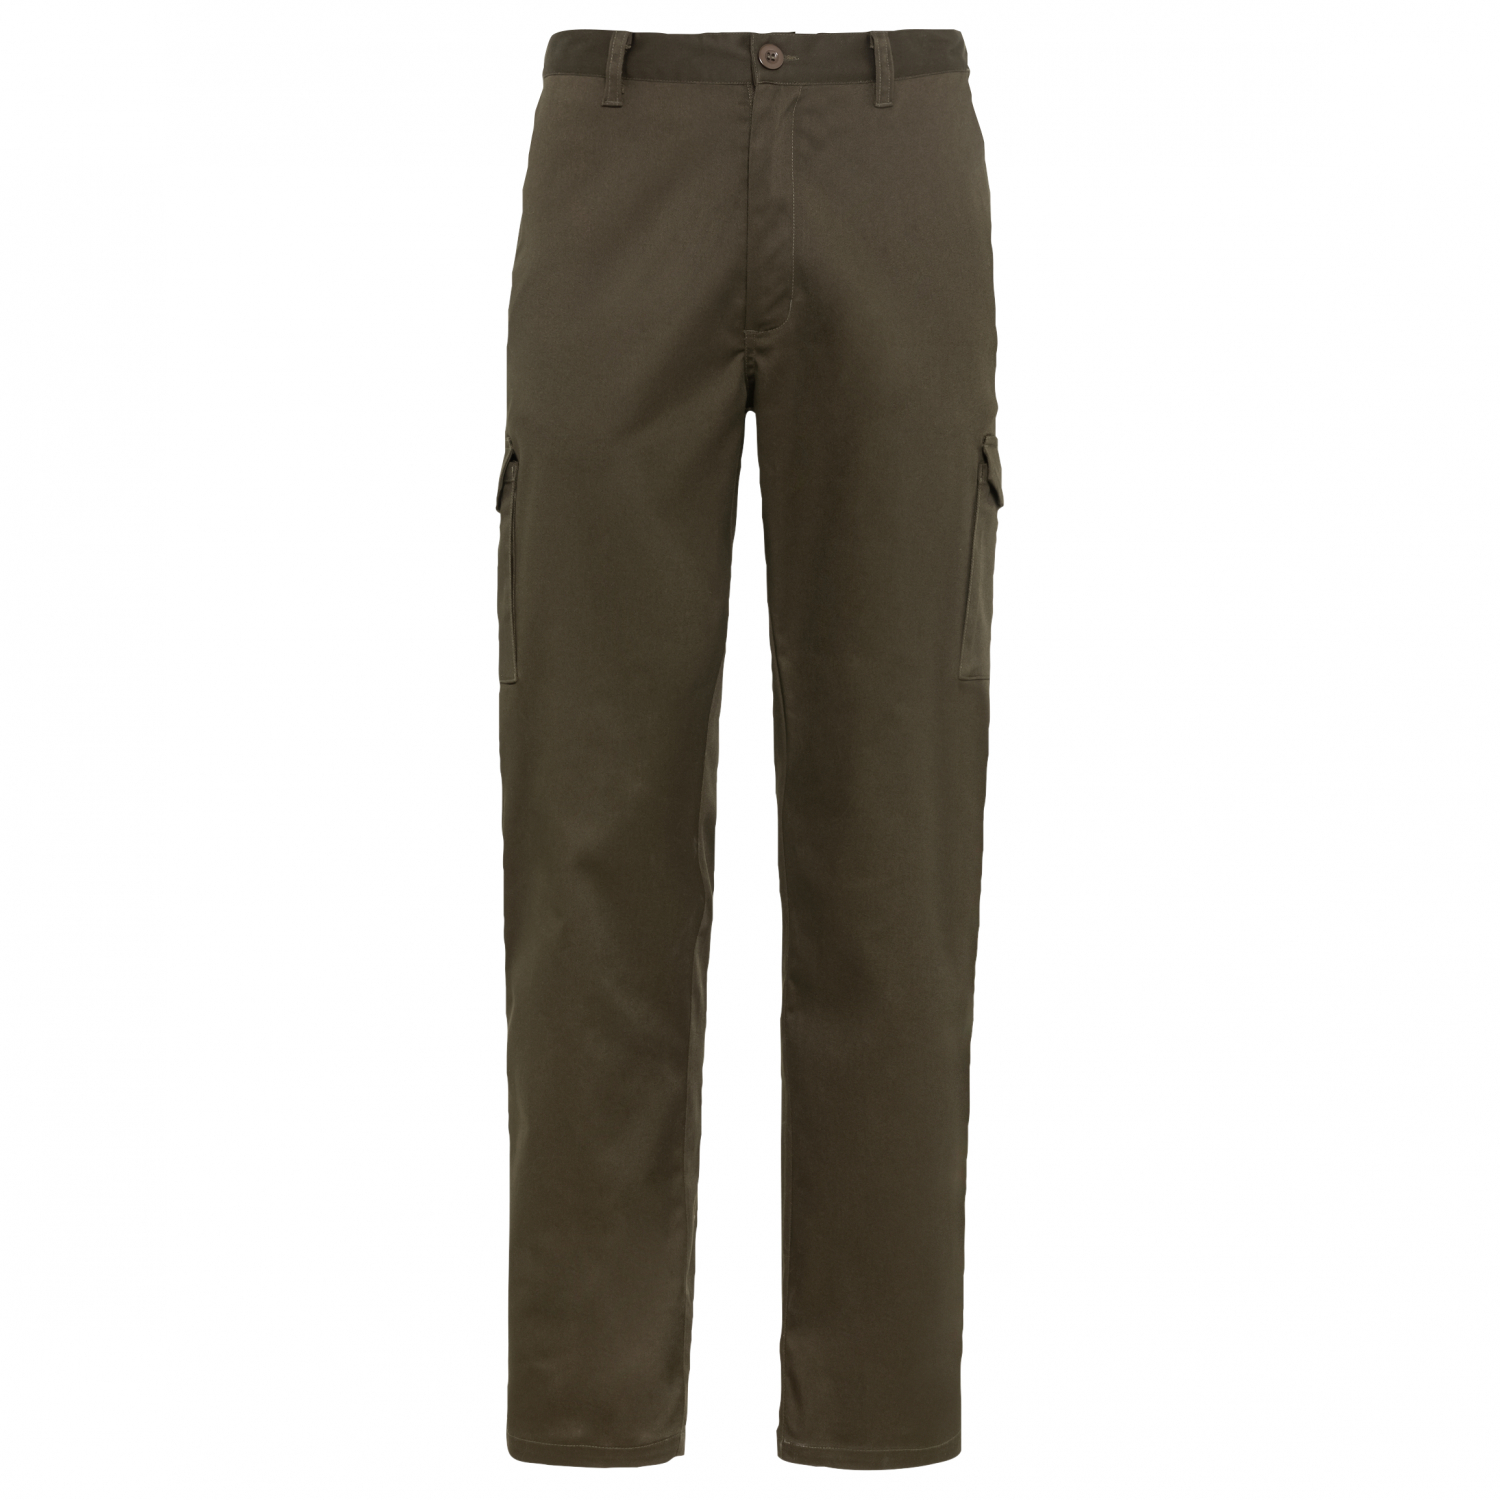 Men's All-round outdoor trousers Fjaerland 